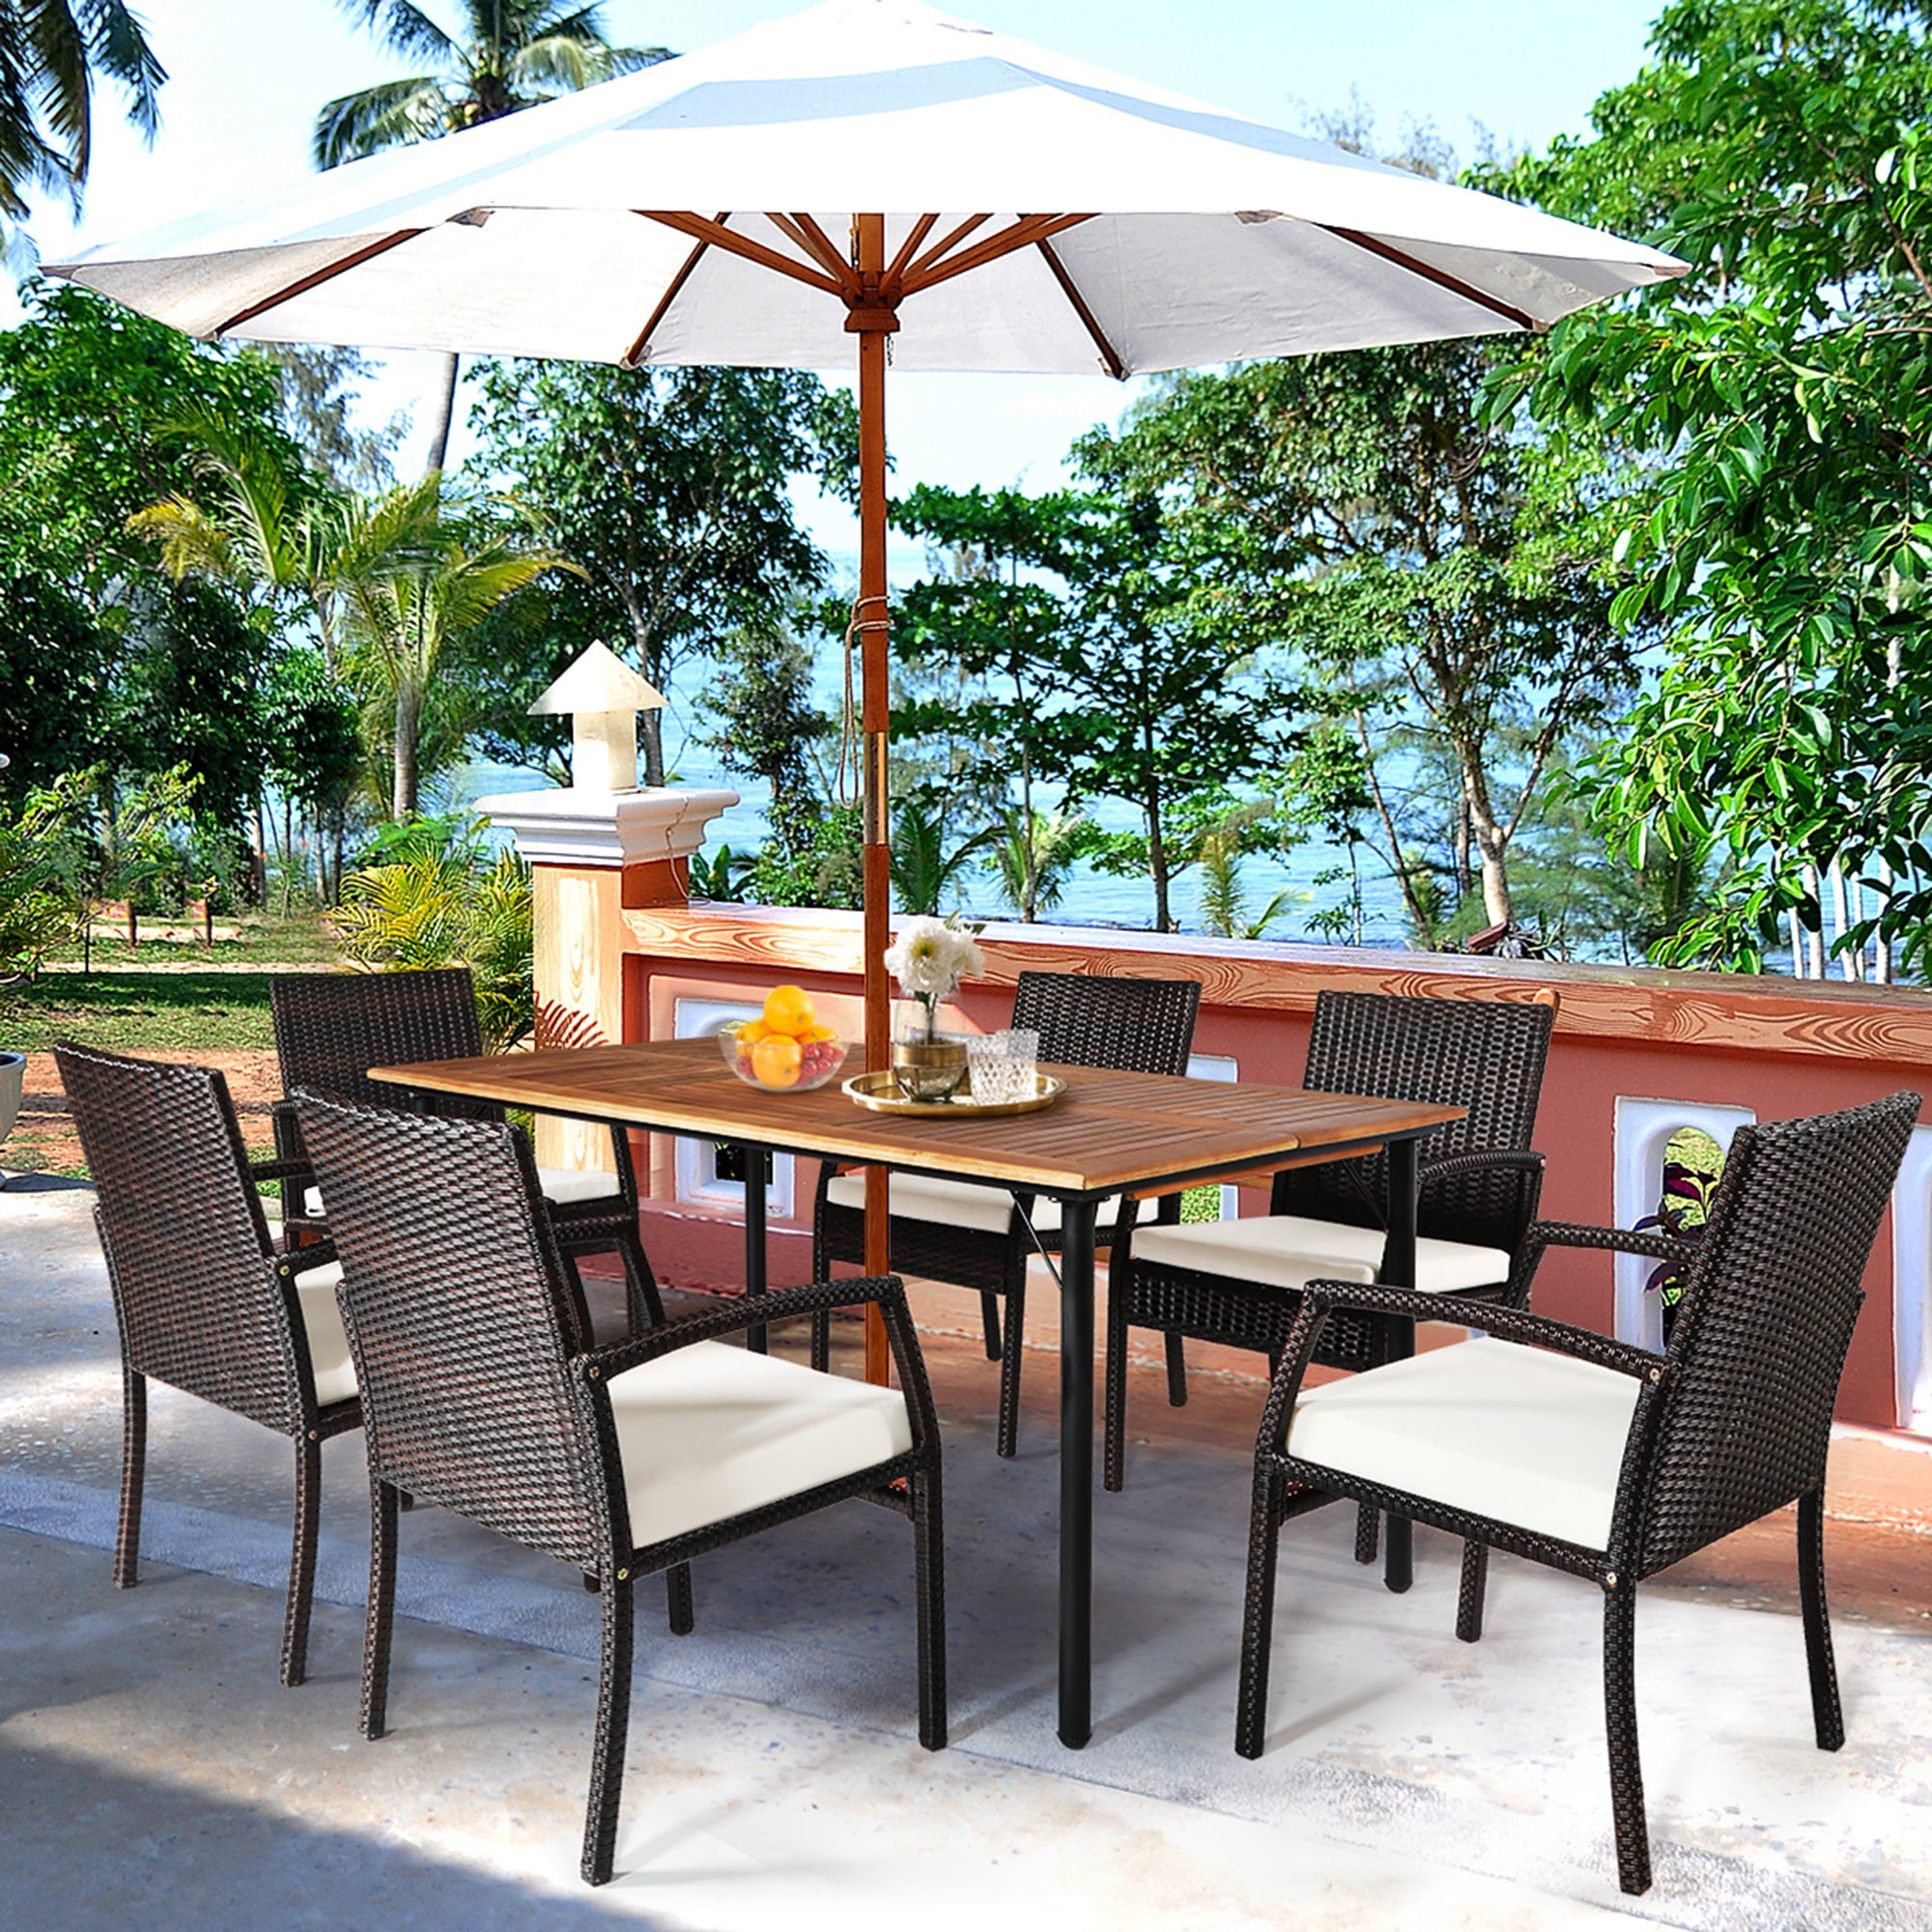 Gymax 7 Pieces Patio Dining Furniture, 7pcs Patio Rattan Cushioned Dining Set With Umbrella Hole